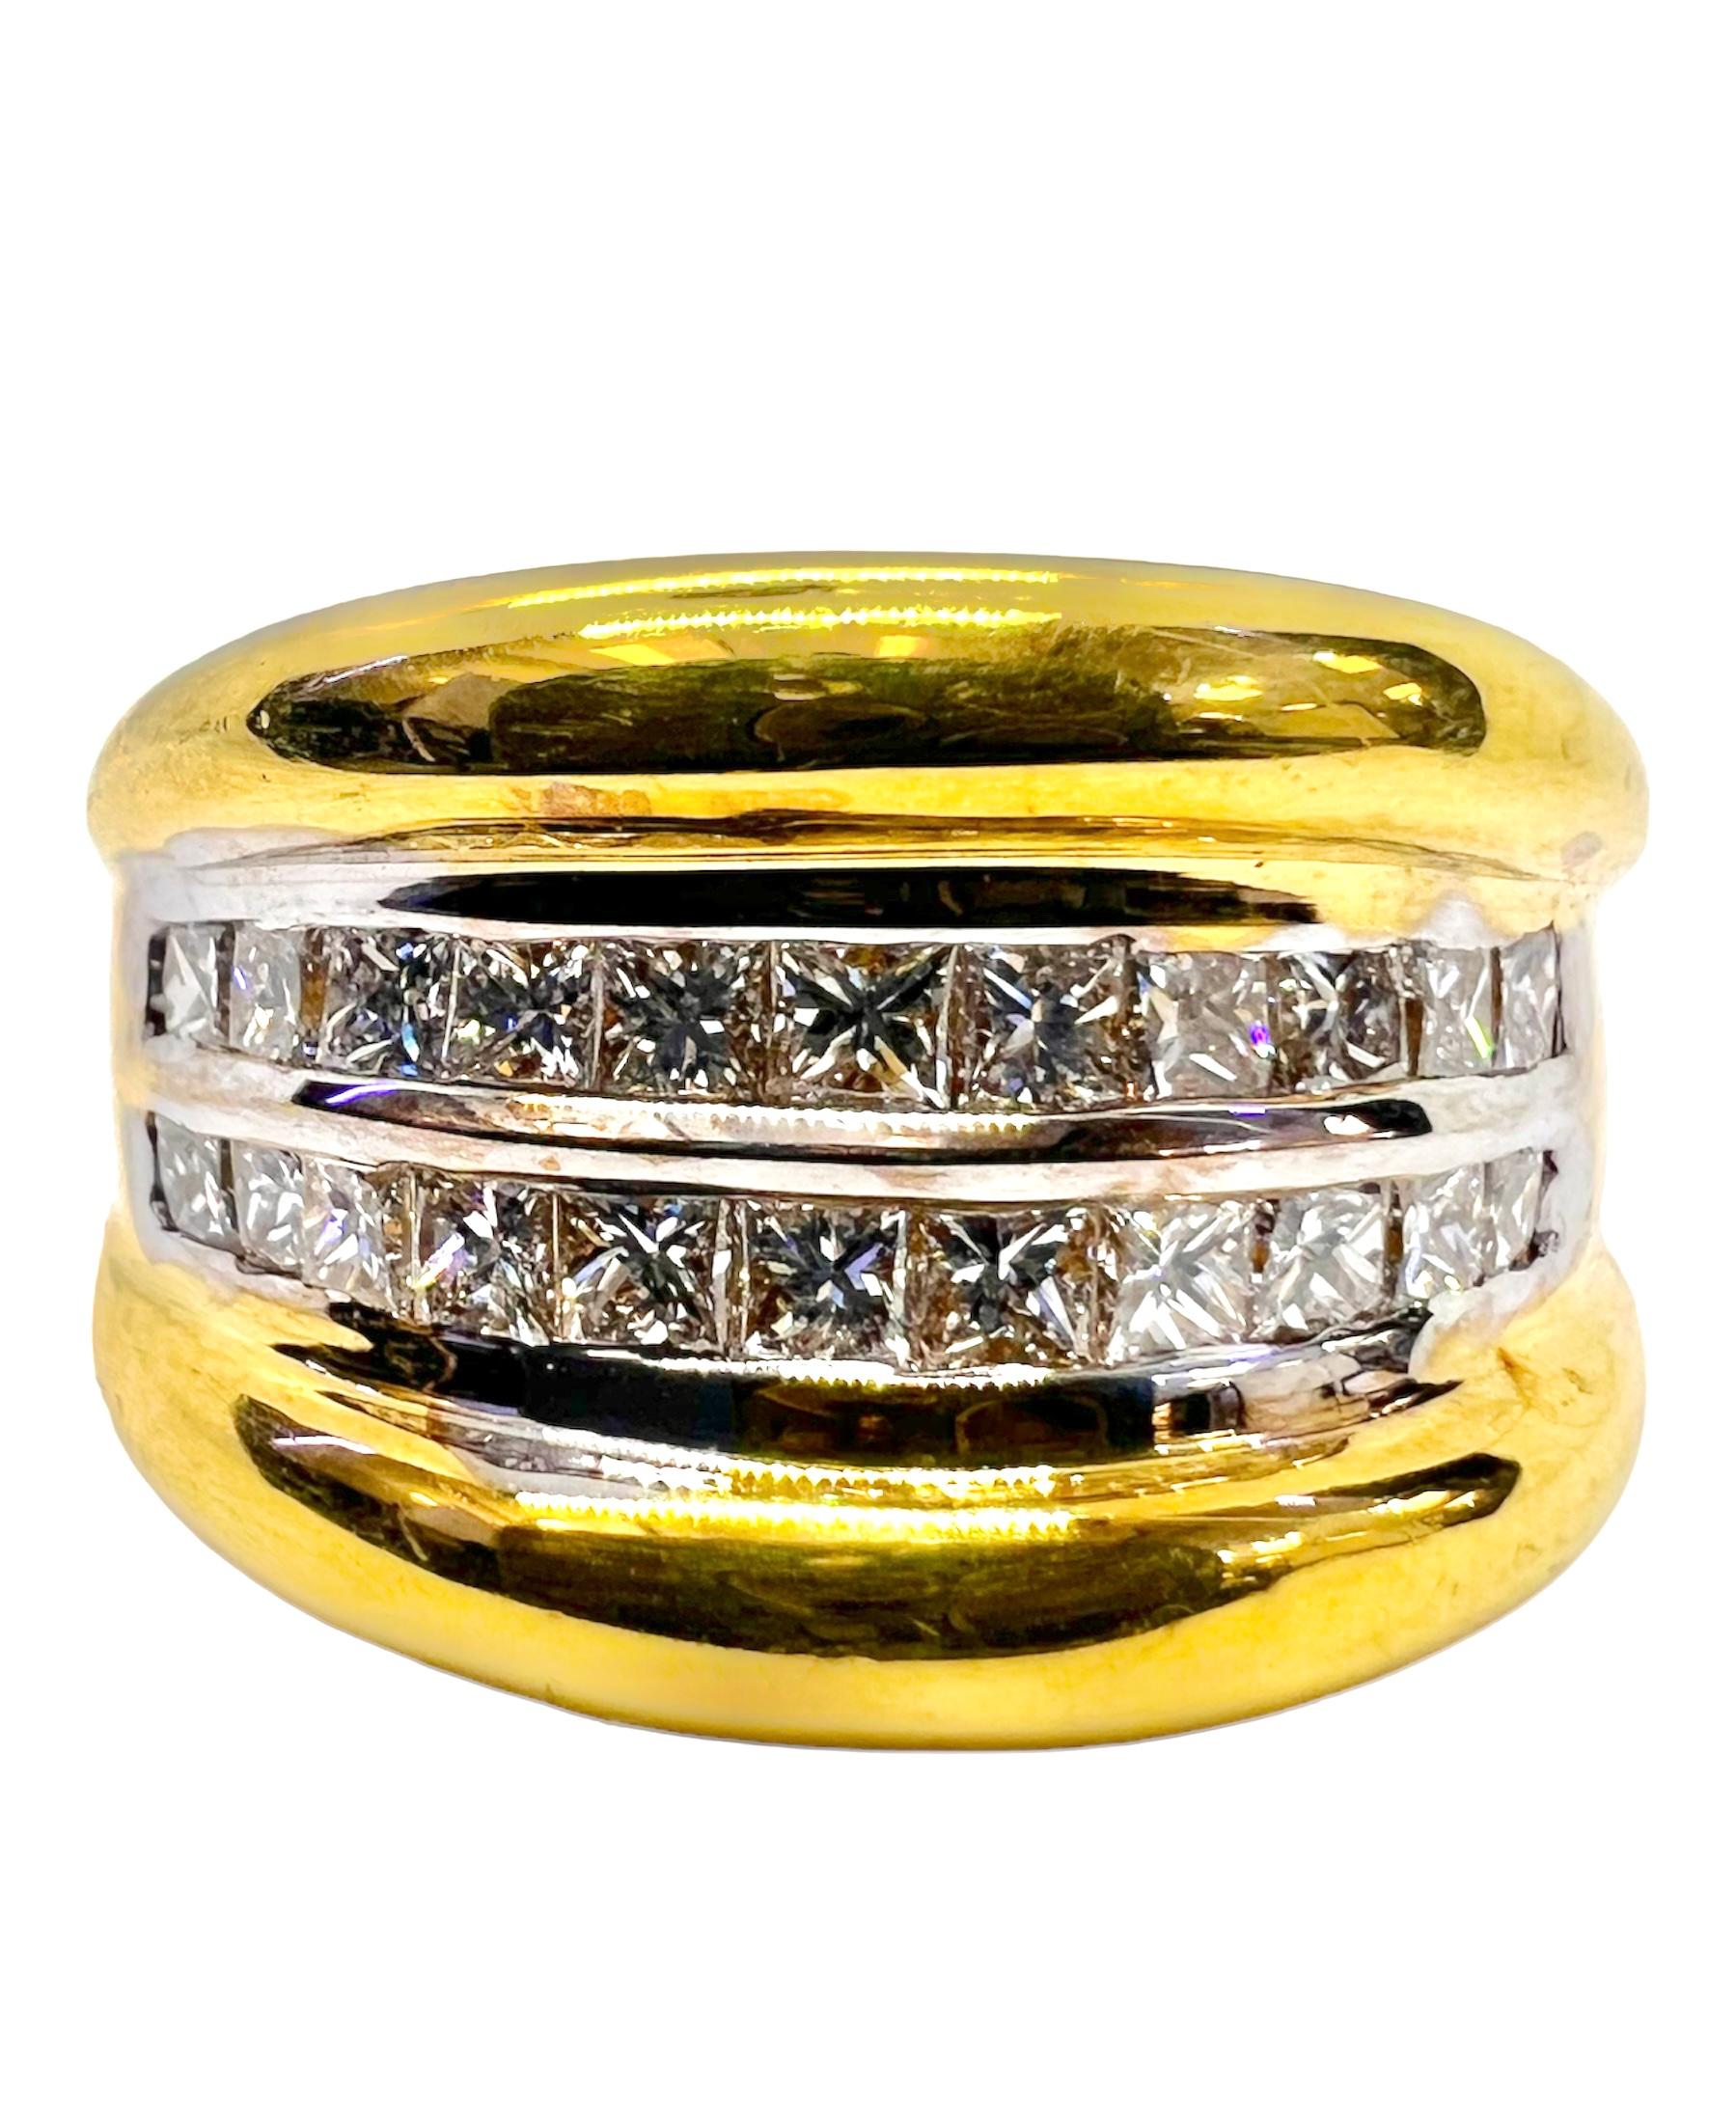 18K yellow gold ring with square cut diamonds.

Sophia D by Joseph Dardashti LTD has been known worldwide for 35 years and are inspired by classic Art Deco design that merges with modern manufacturing techniques.  